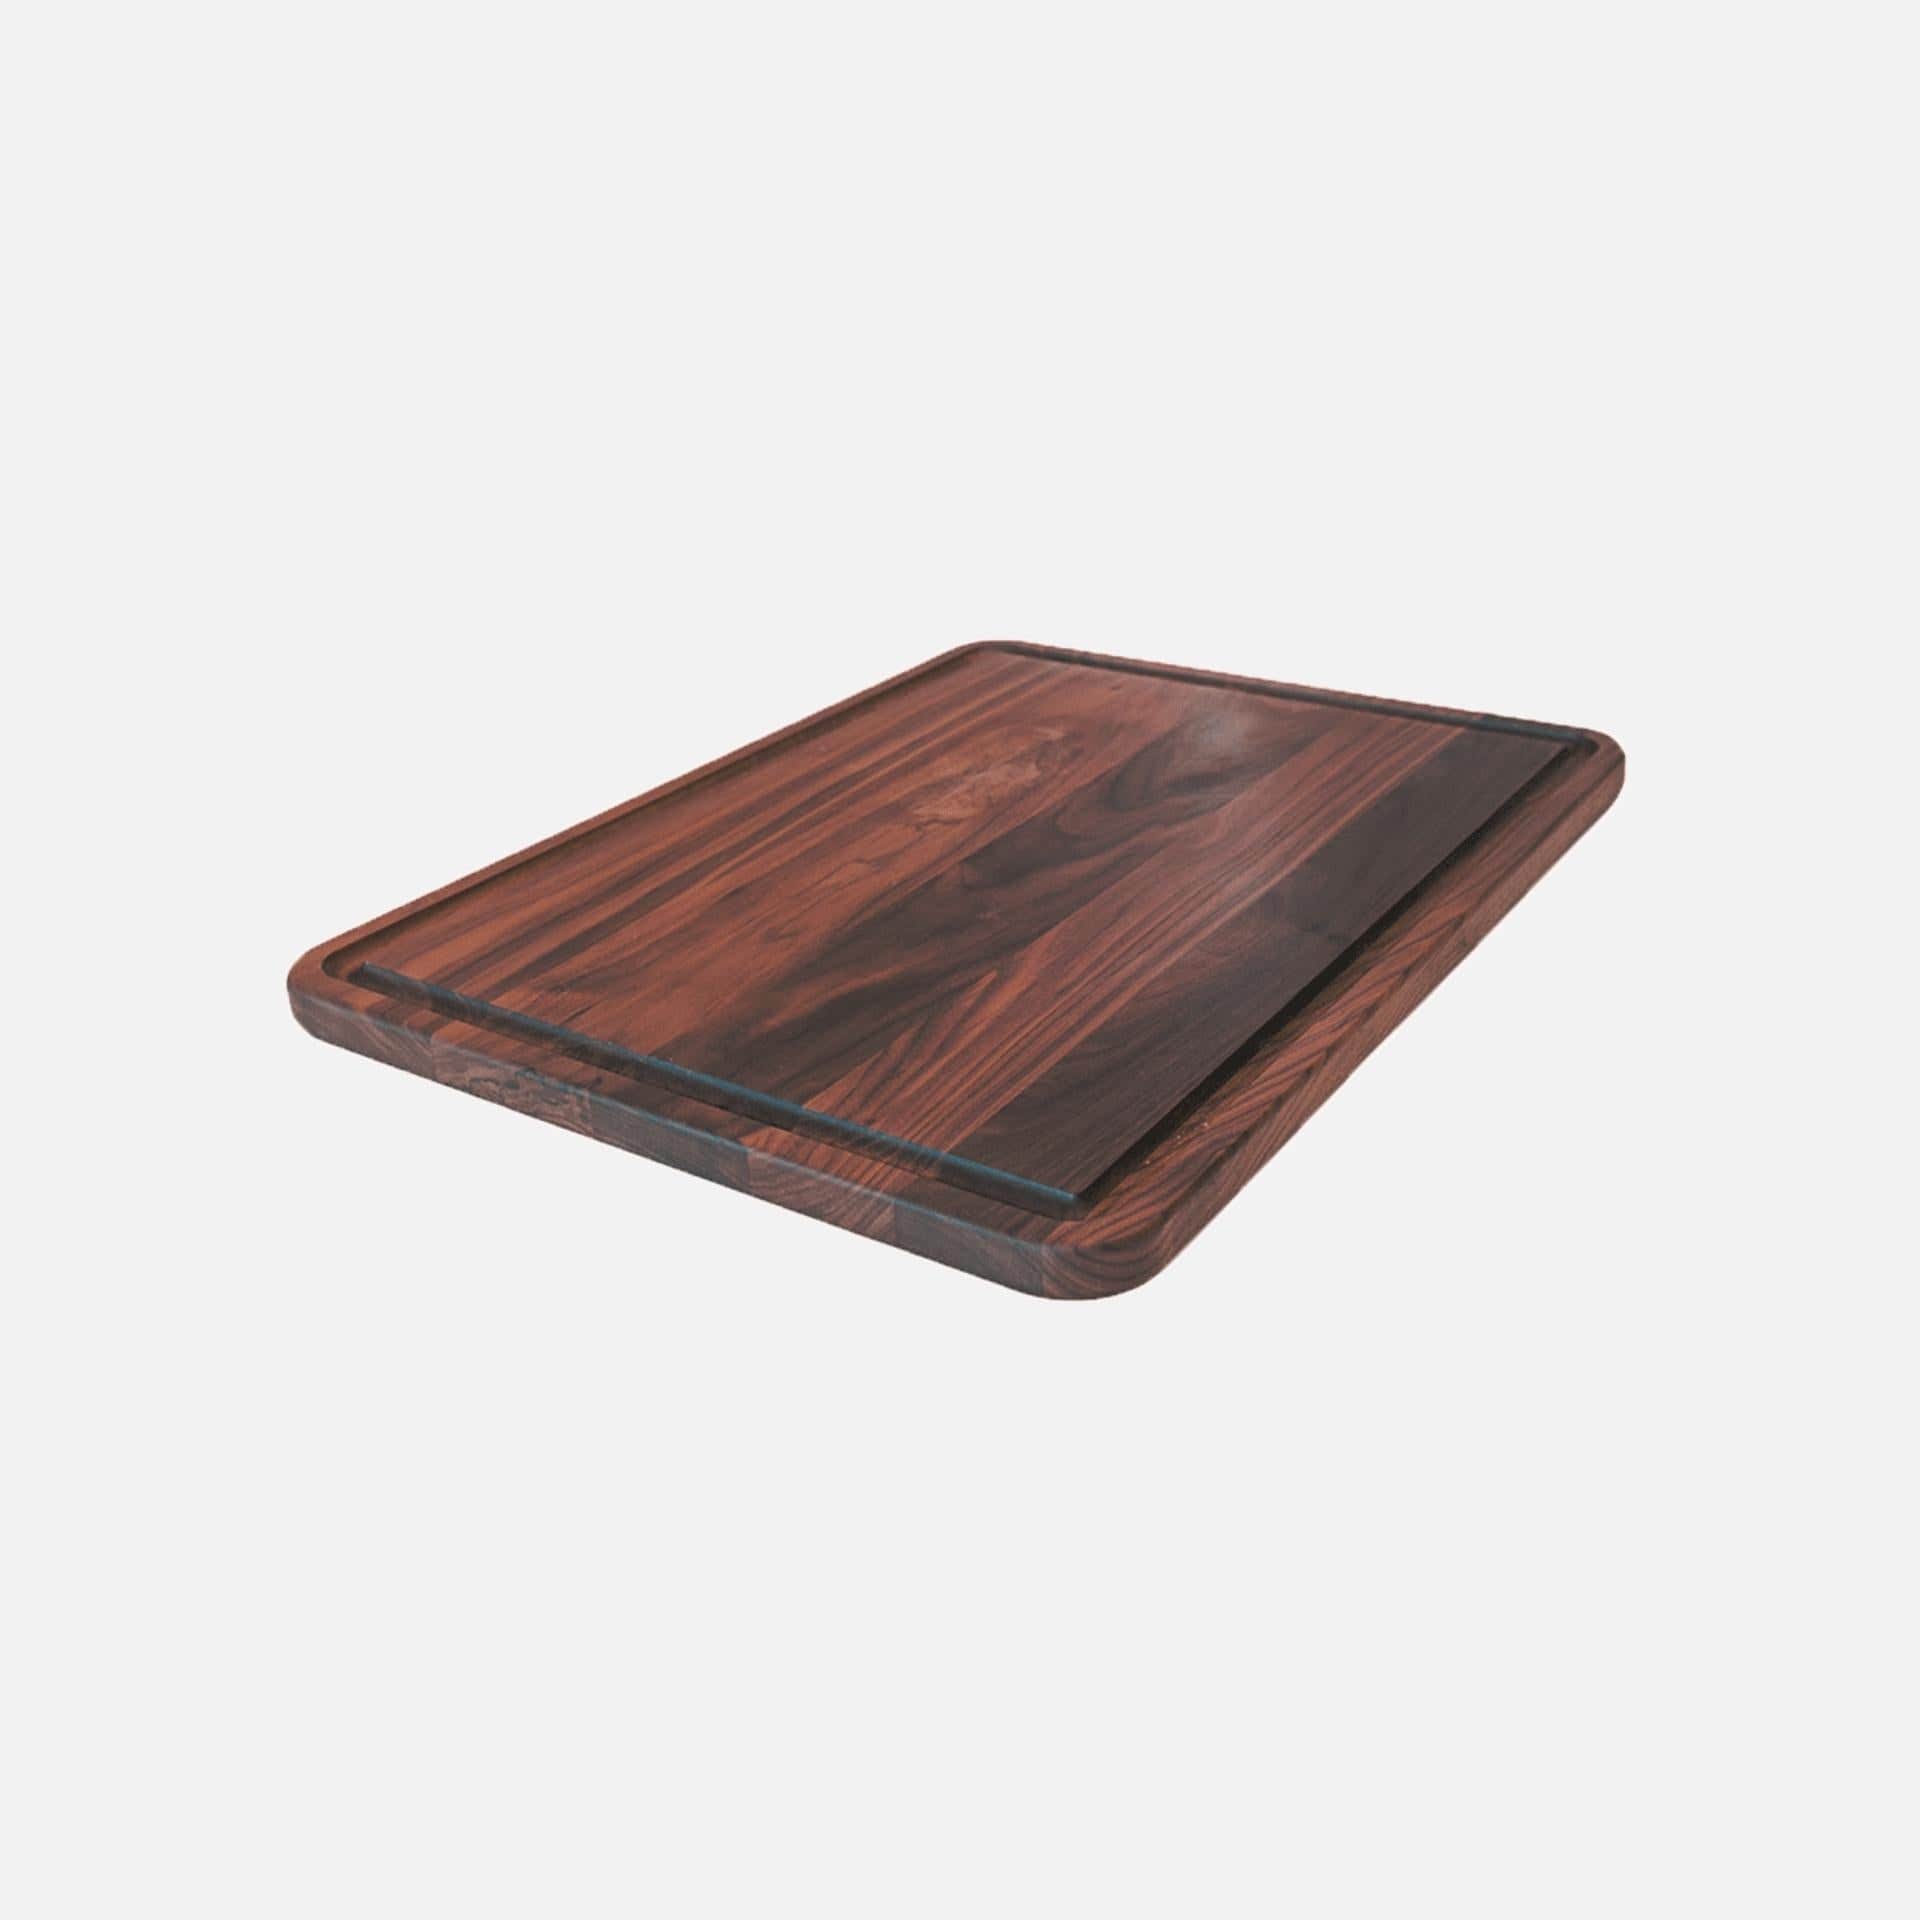 Best Meat Cutting Board: Material and Design Features to Look For -  Virginia Boys Kitchens